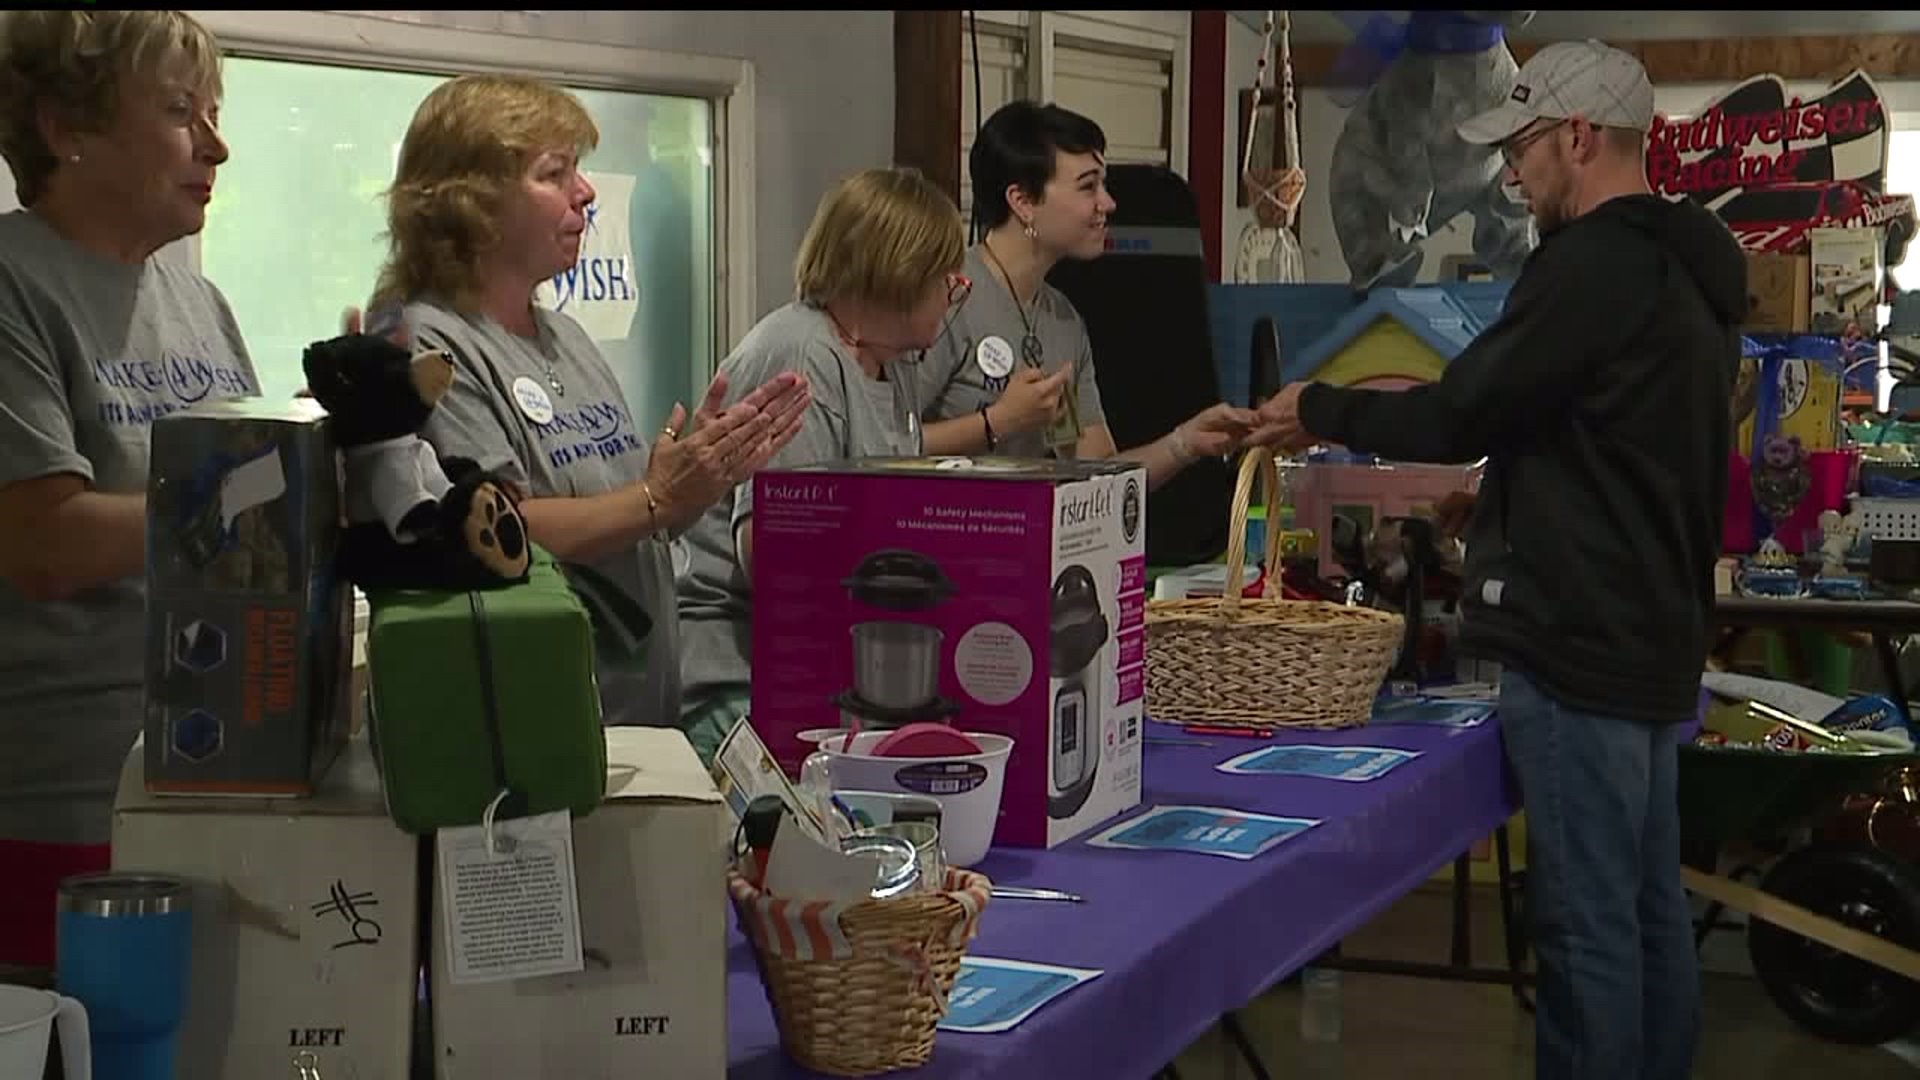 19th annual fundraiser for Make-A-Wish foundation held in Dover